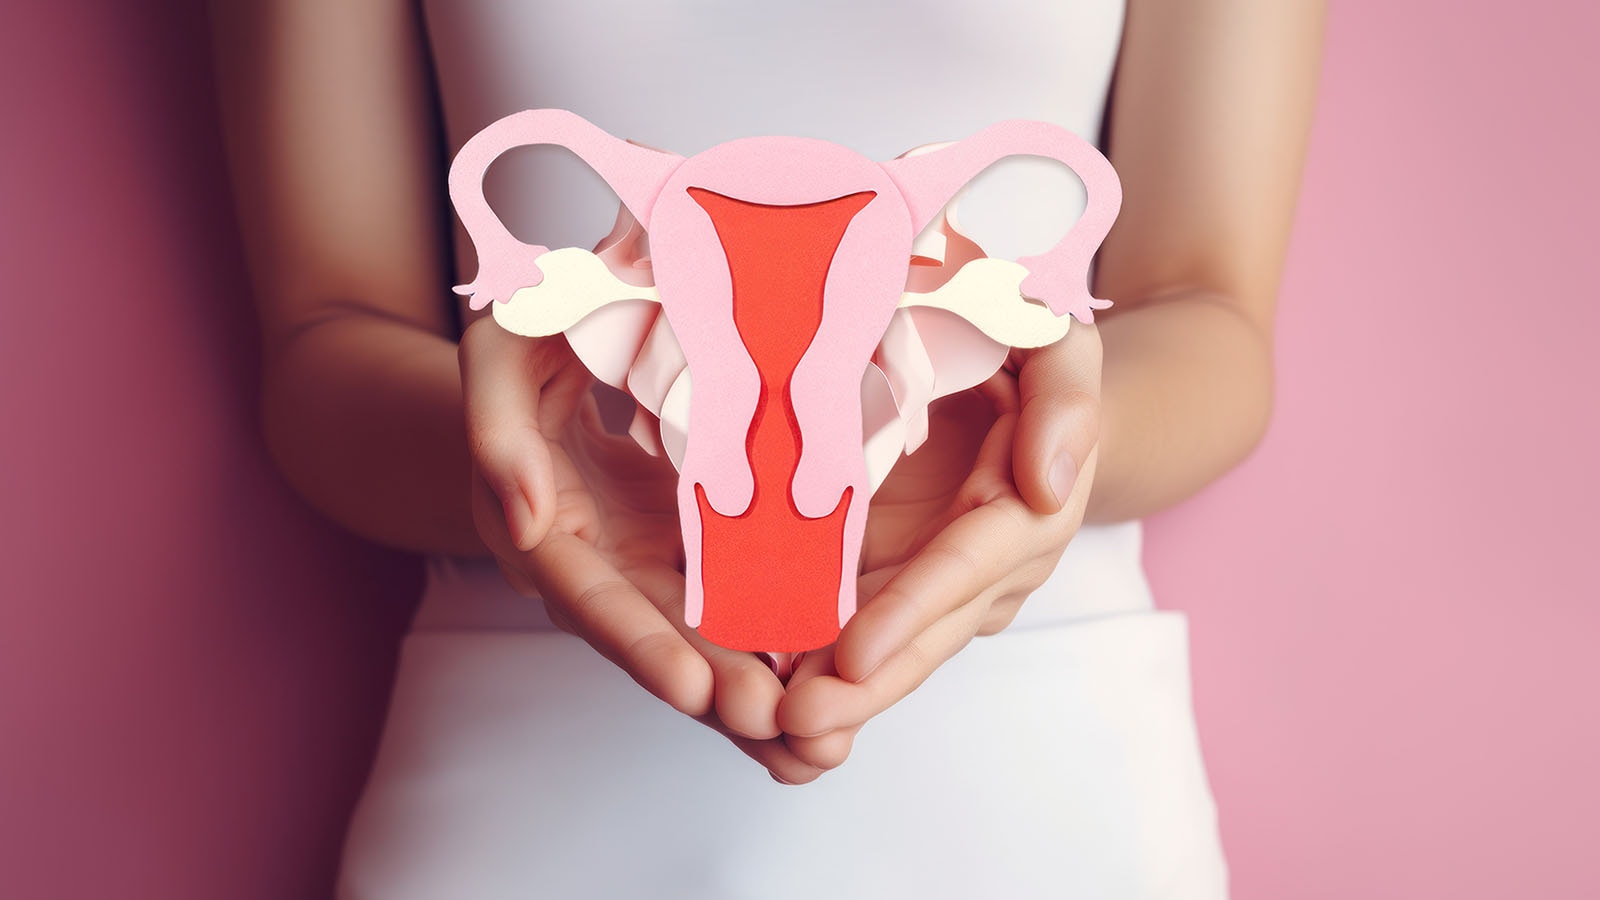 Asymptomatic uterine fibroids: All you need to know